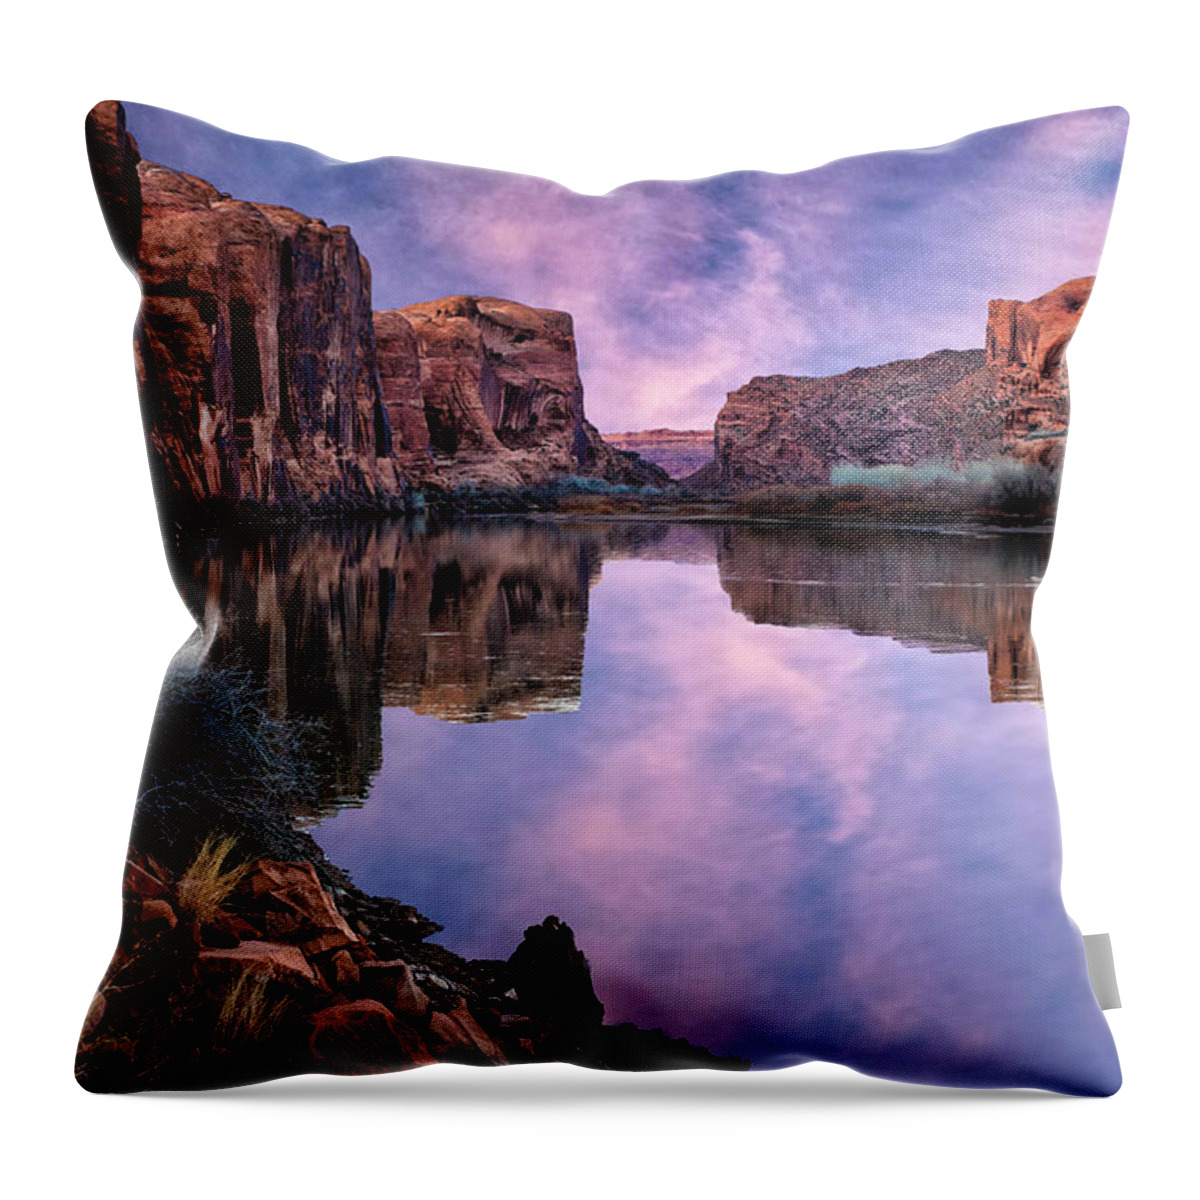 Canyonlands Throw Pillow featuring the photograph Canyonlands Sunset by Michael Ash